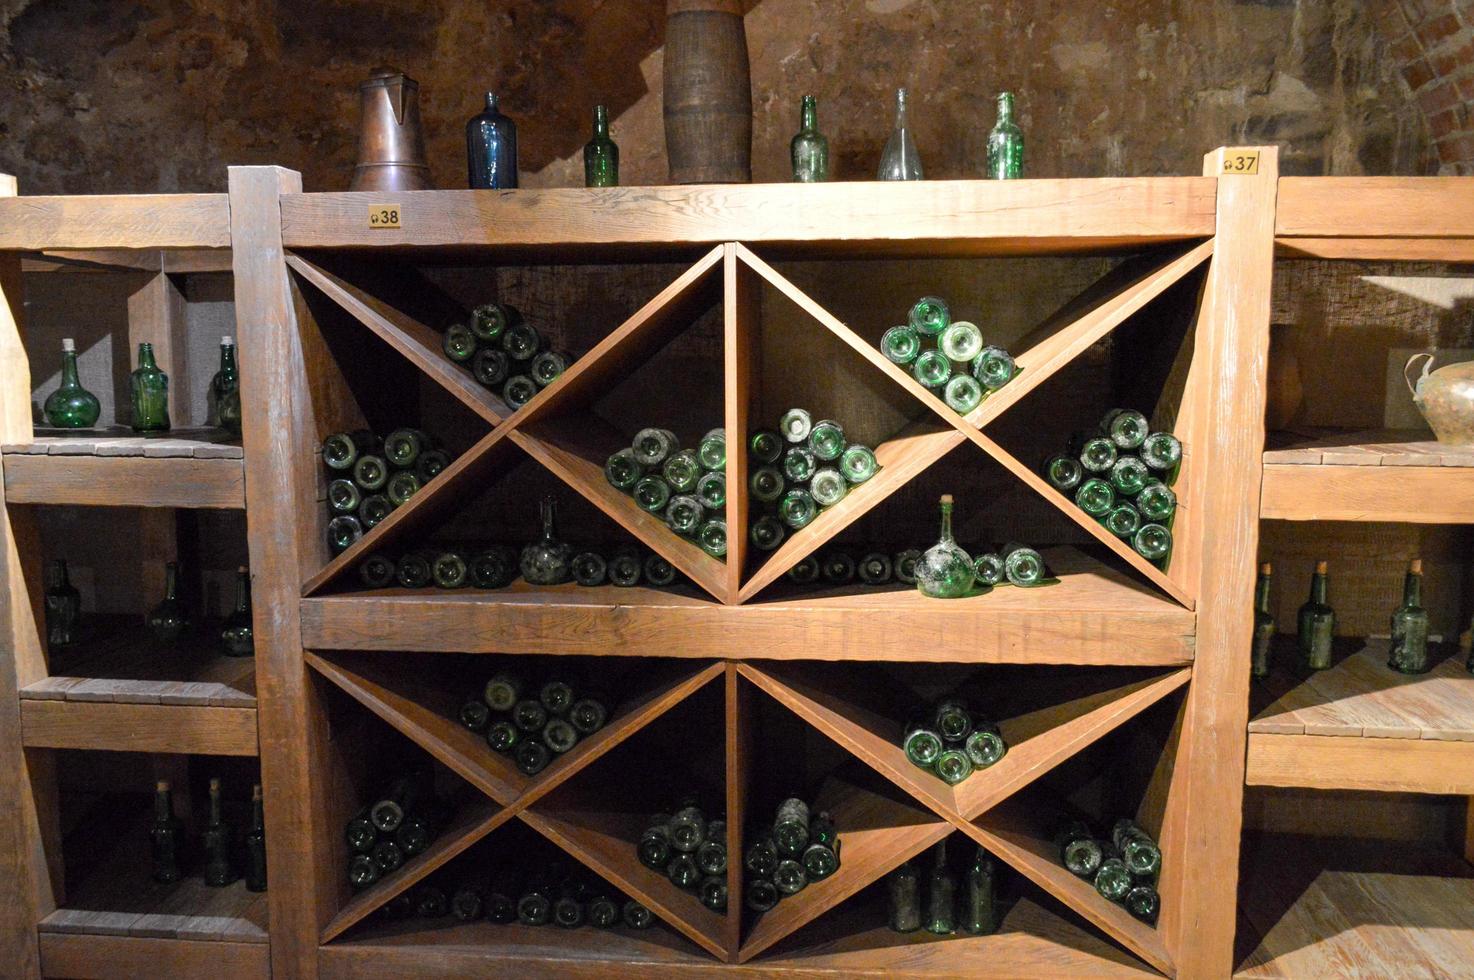 Vintage green empty wine and beer glass bottles in a wine cupboard with shelves in an old medieval bricked stone cellar photo